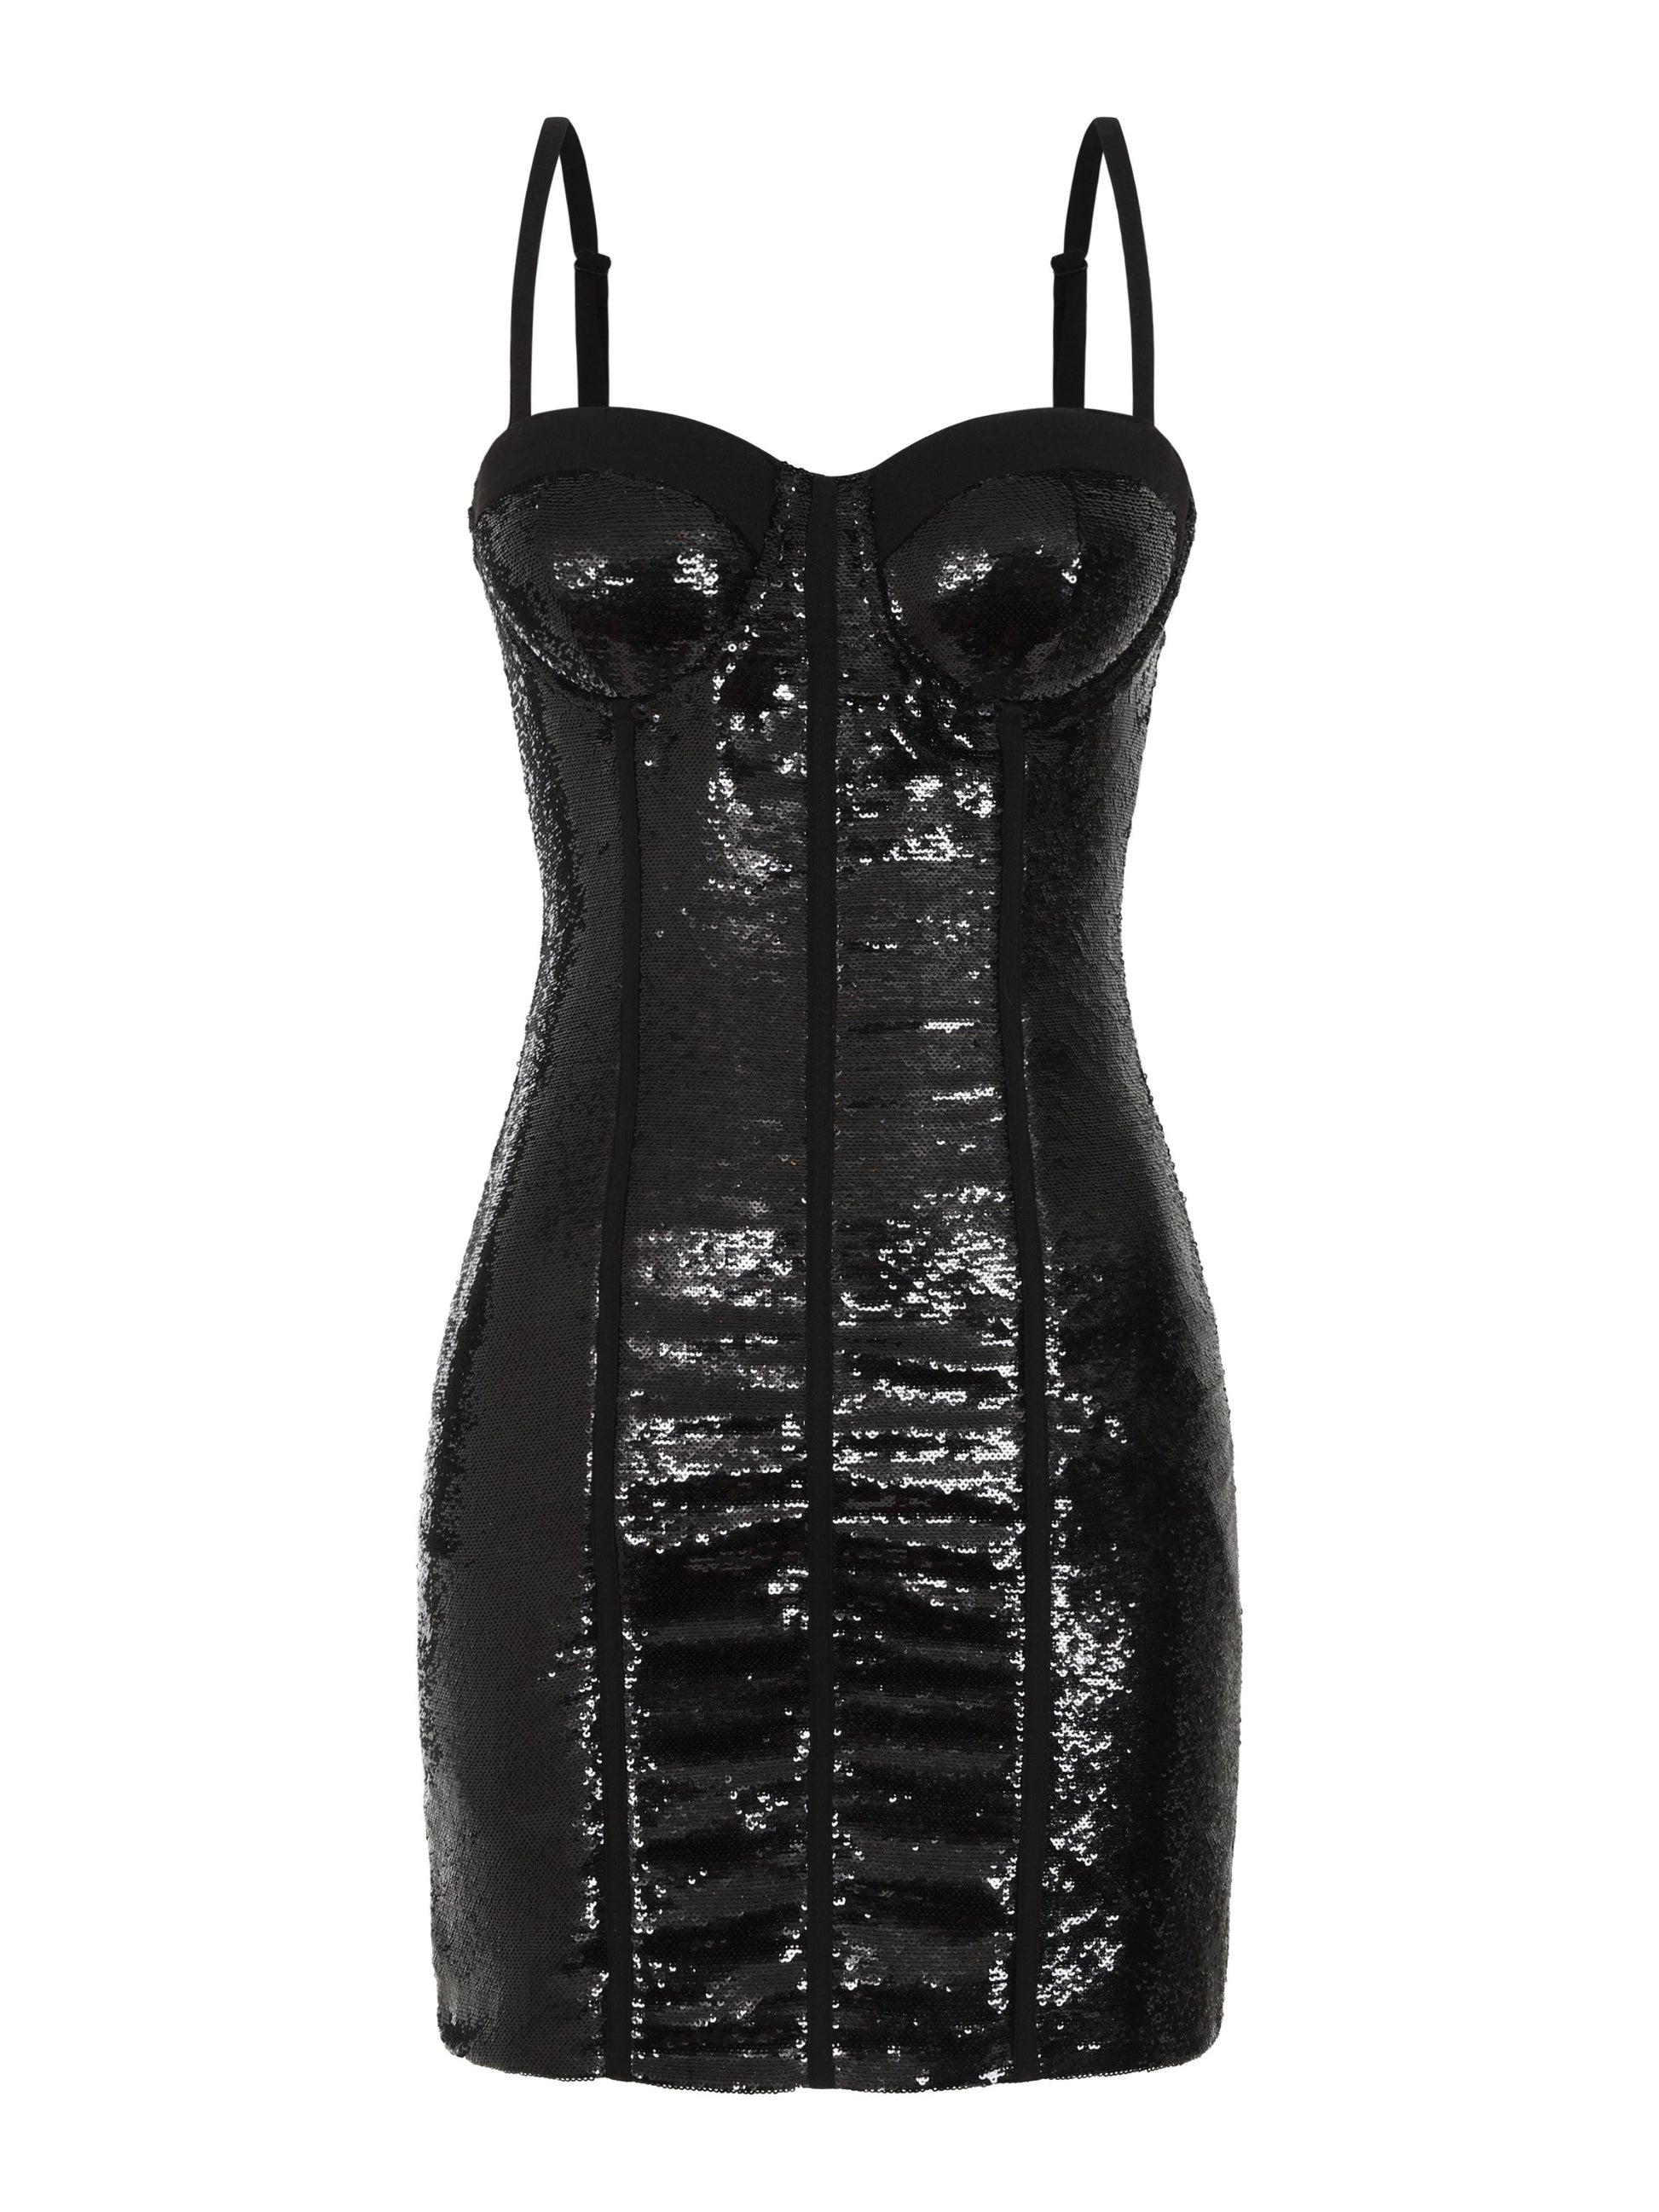 Black sequin minidress with bustier